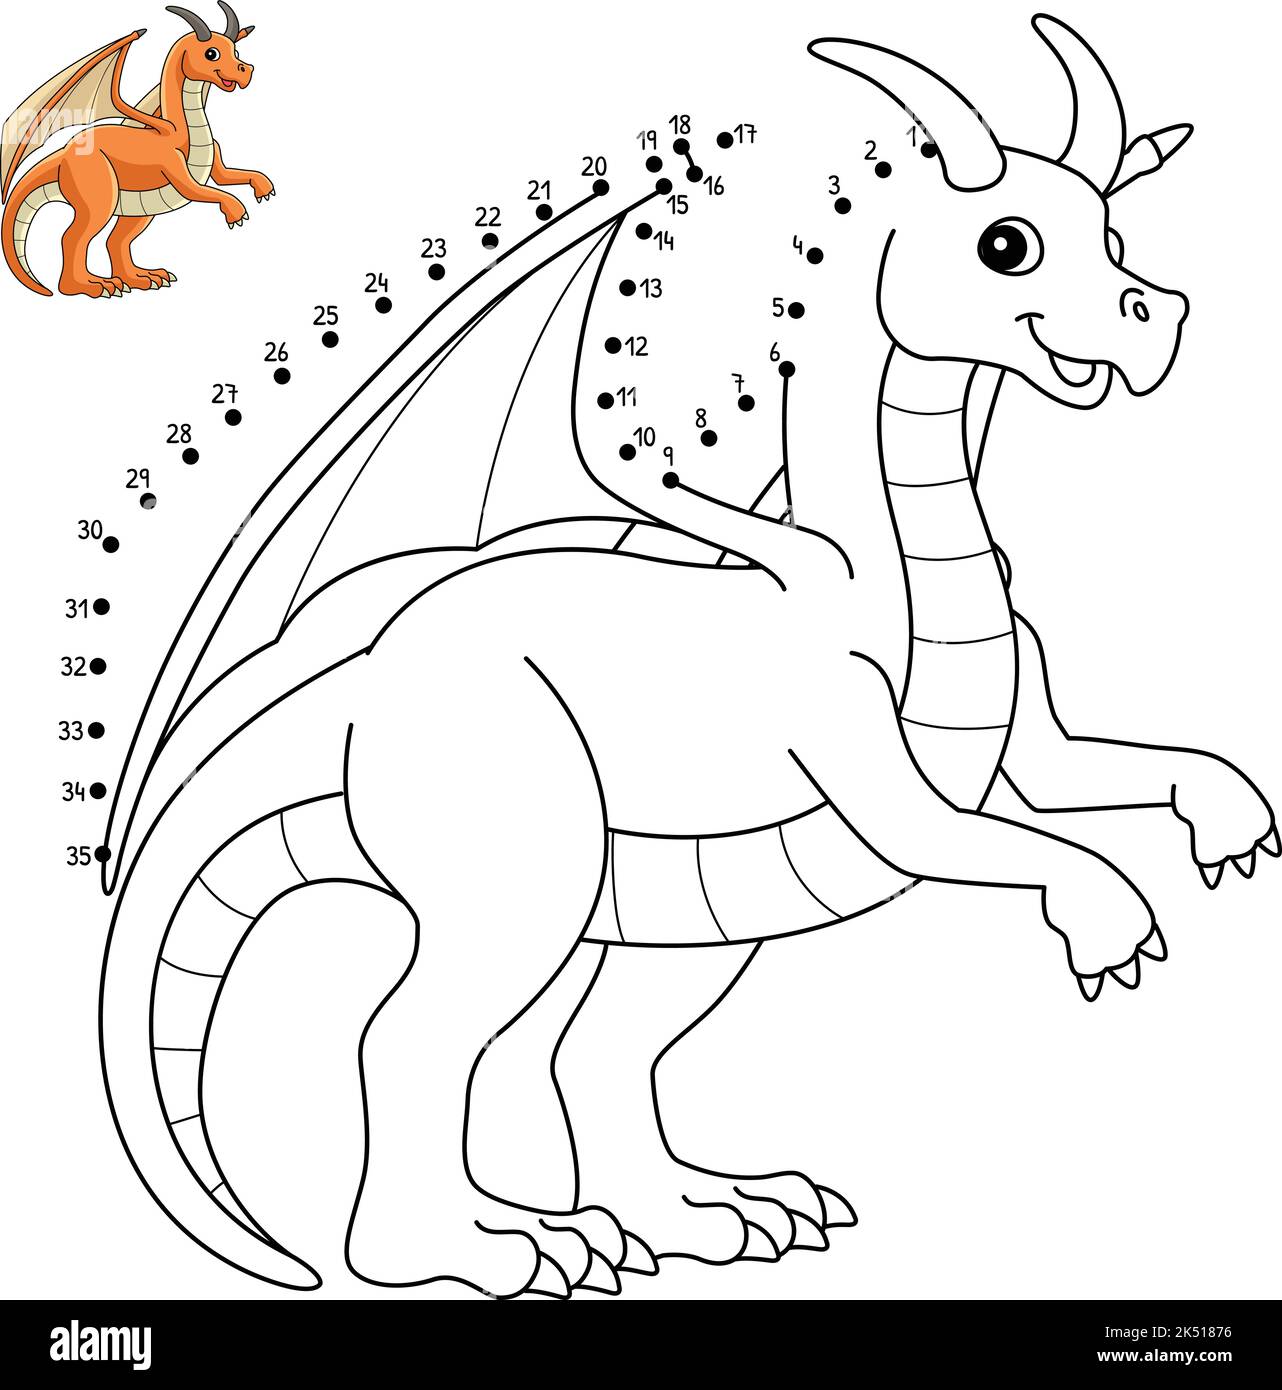 Dot to Dot Dragon Animal Isolated Coloring Page  Stock Vector